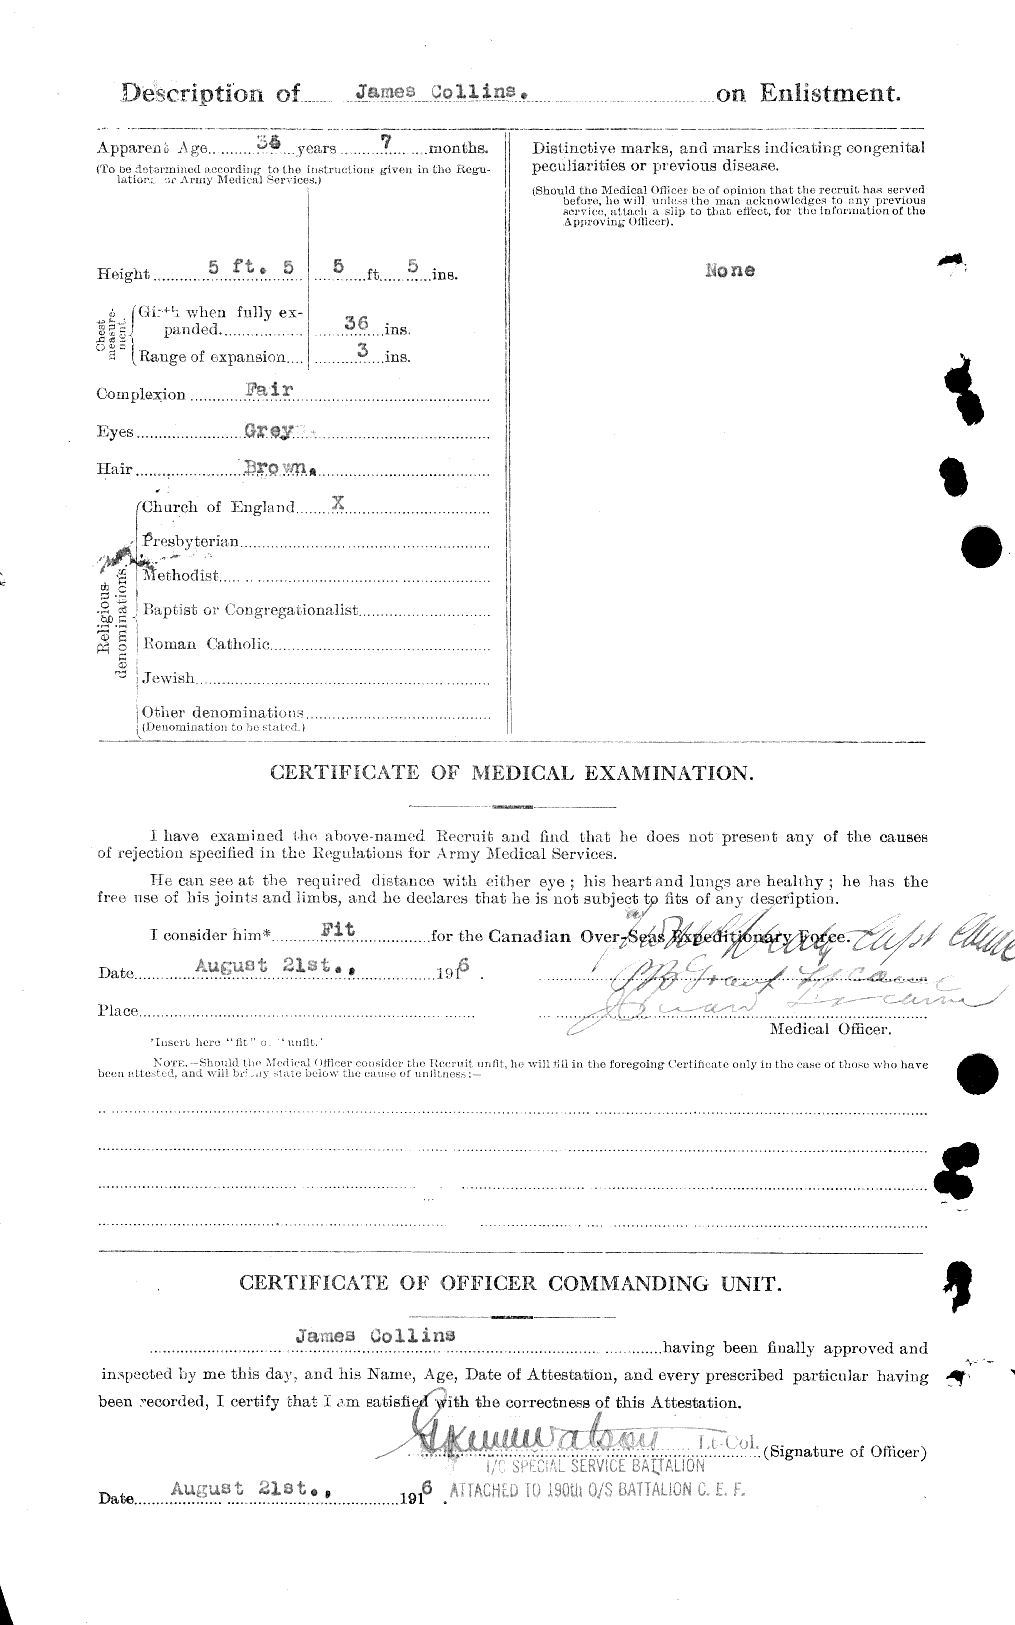 Personnel Records of the First World War - CEF 037921b